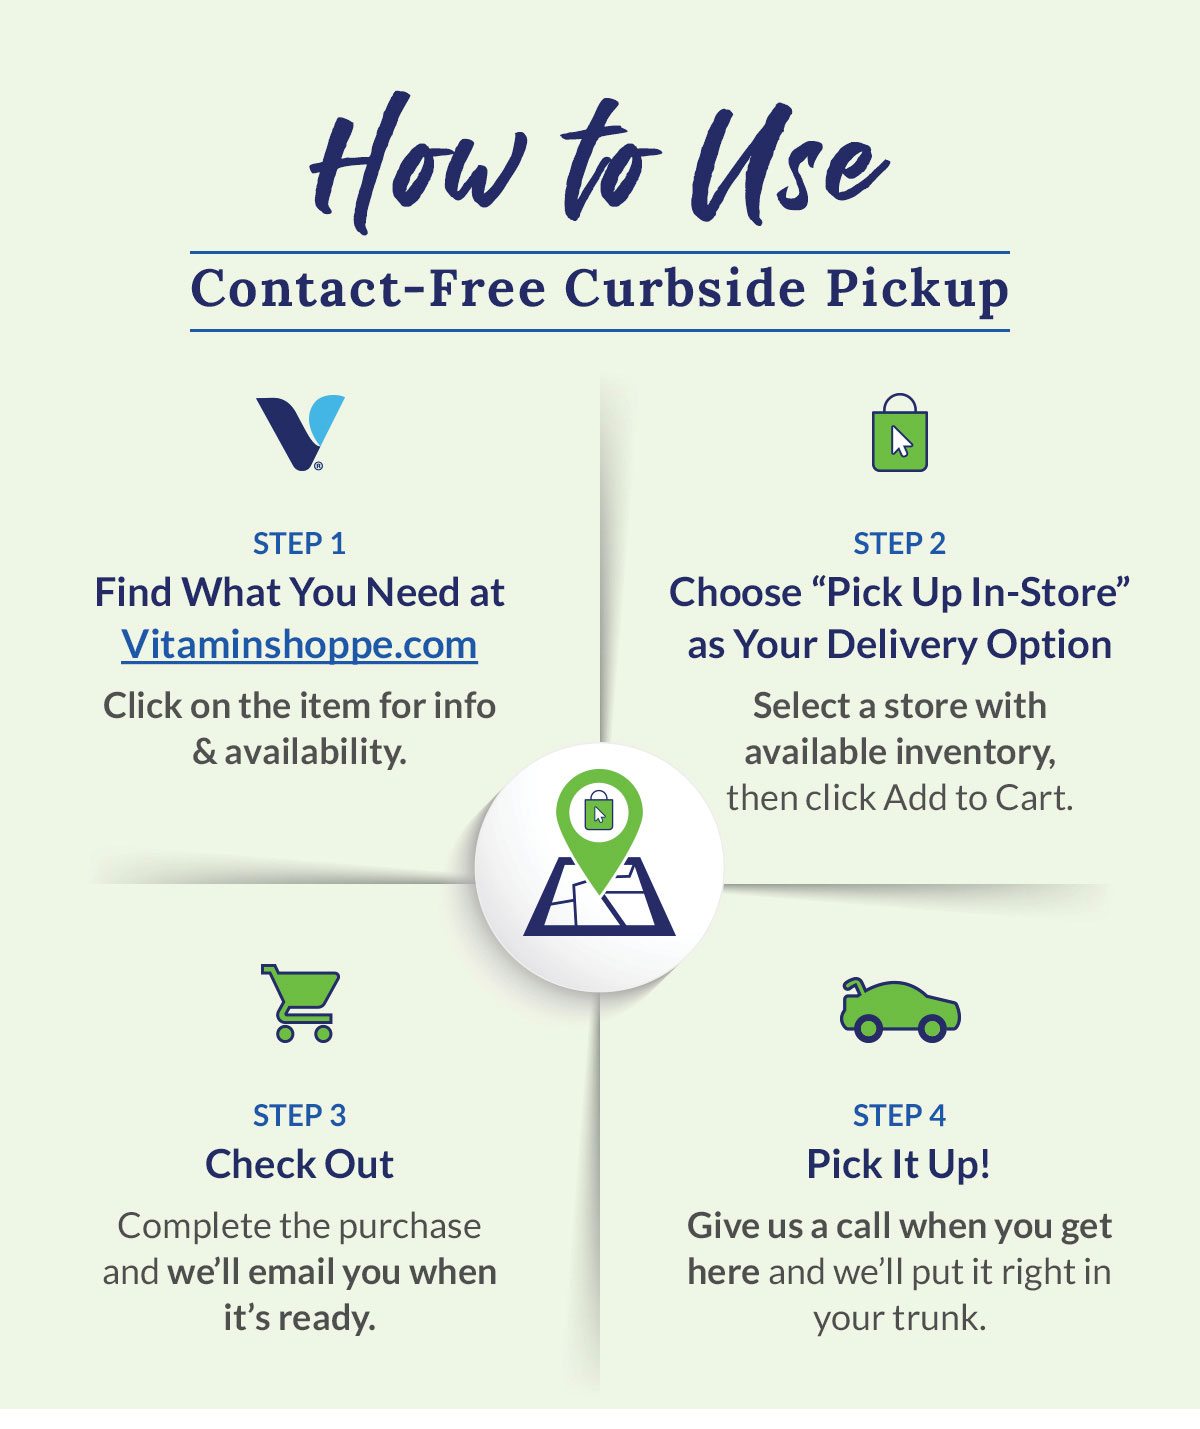 How to Use Contact-Free Curbside Pickup